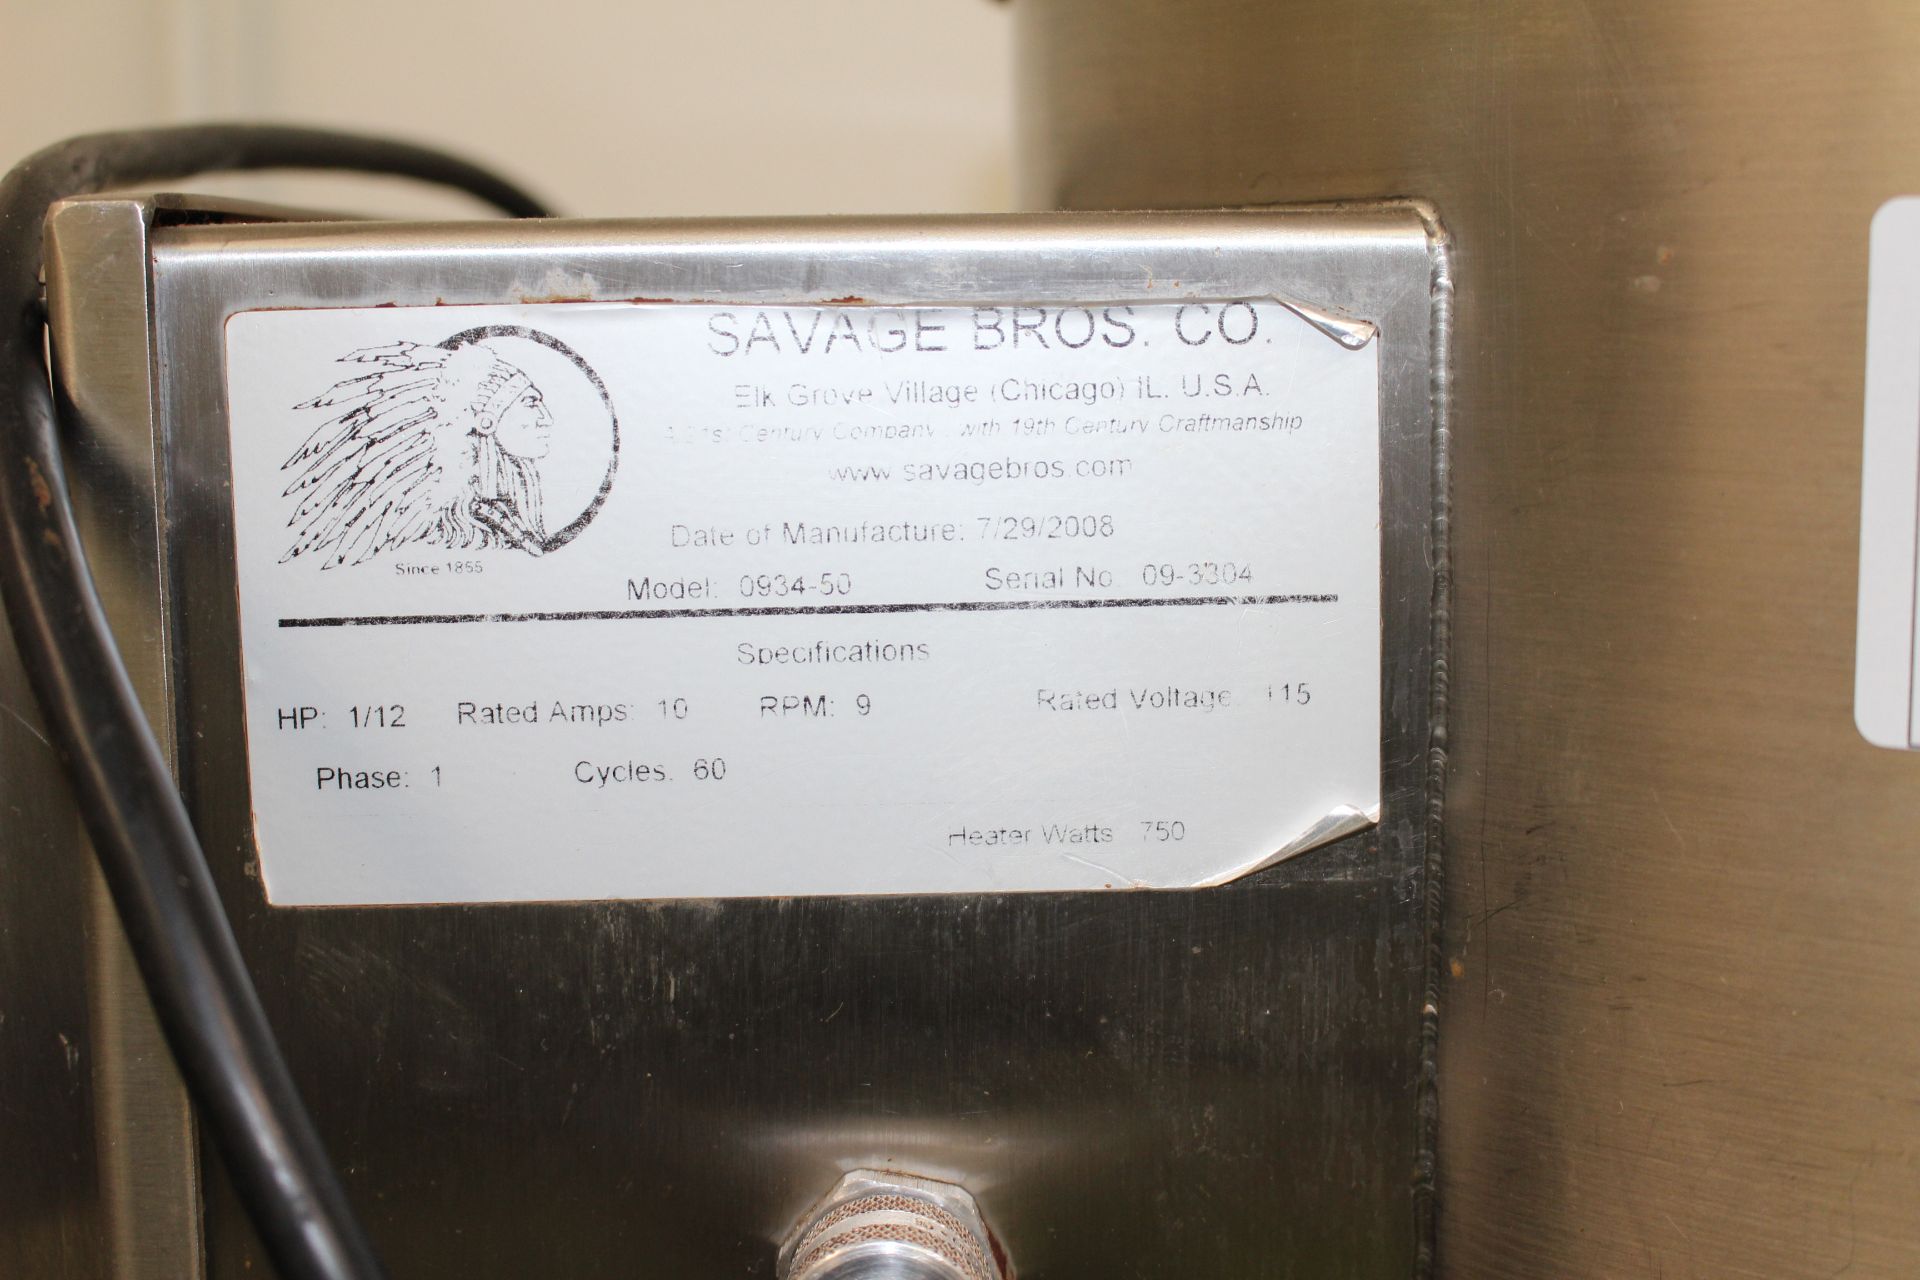 Savage model 0934-50 50-lb Stainless Steel Chocolate Melter melting timer, solenoid to control water - Image 3 of 5